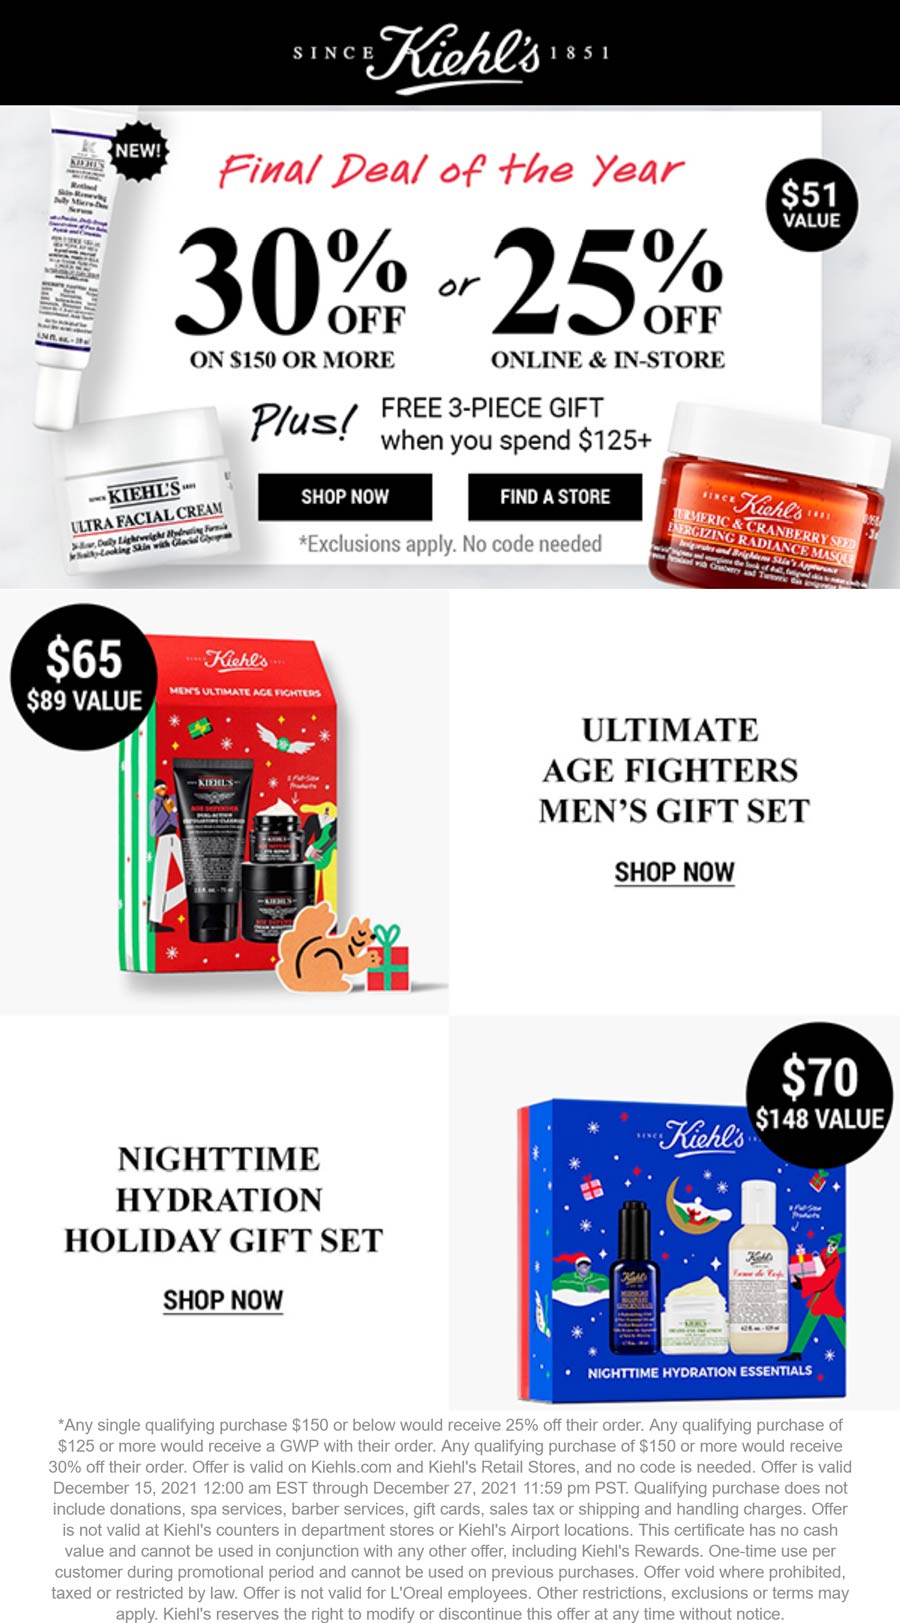 Kiehls stores Coupon  25-30% off + free 3-pc set on $125 at Kiehls, ditto online #kiehls 